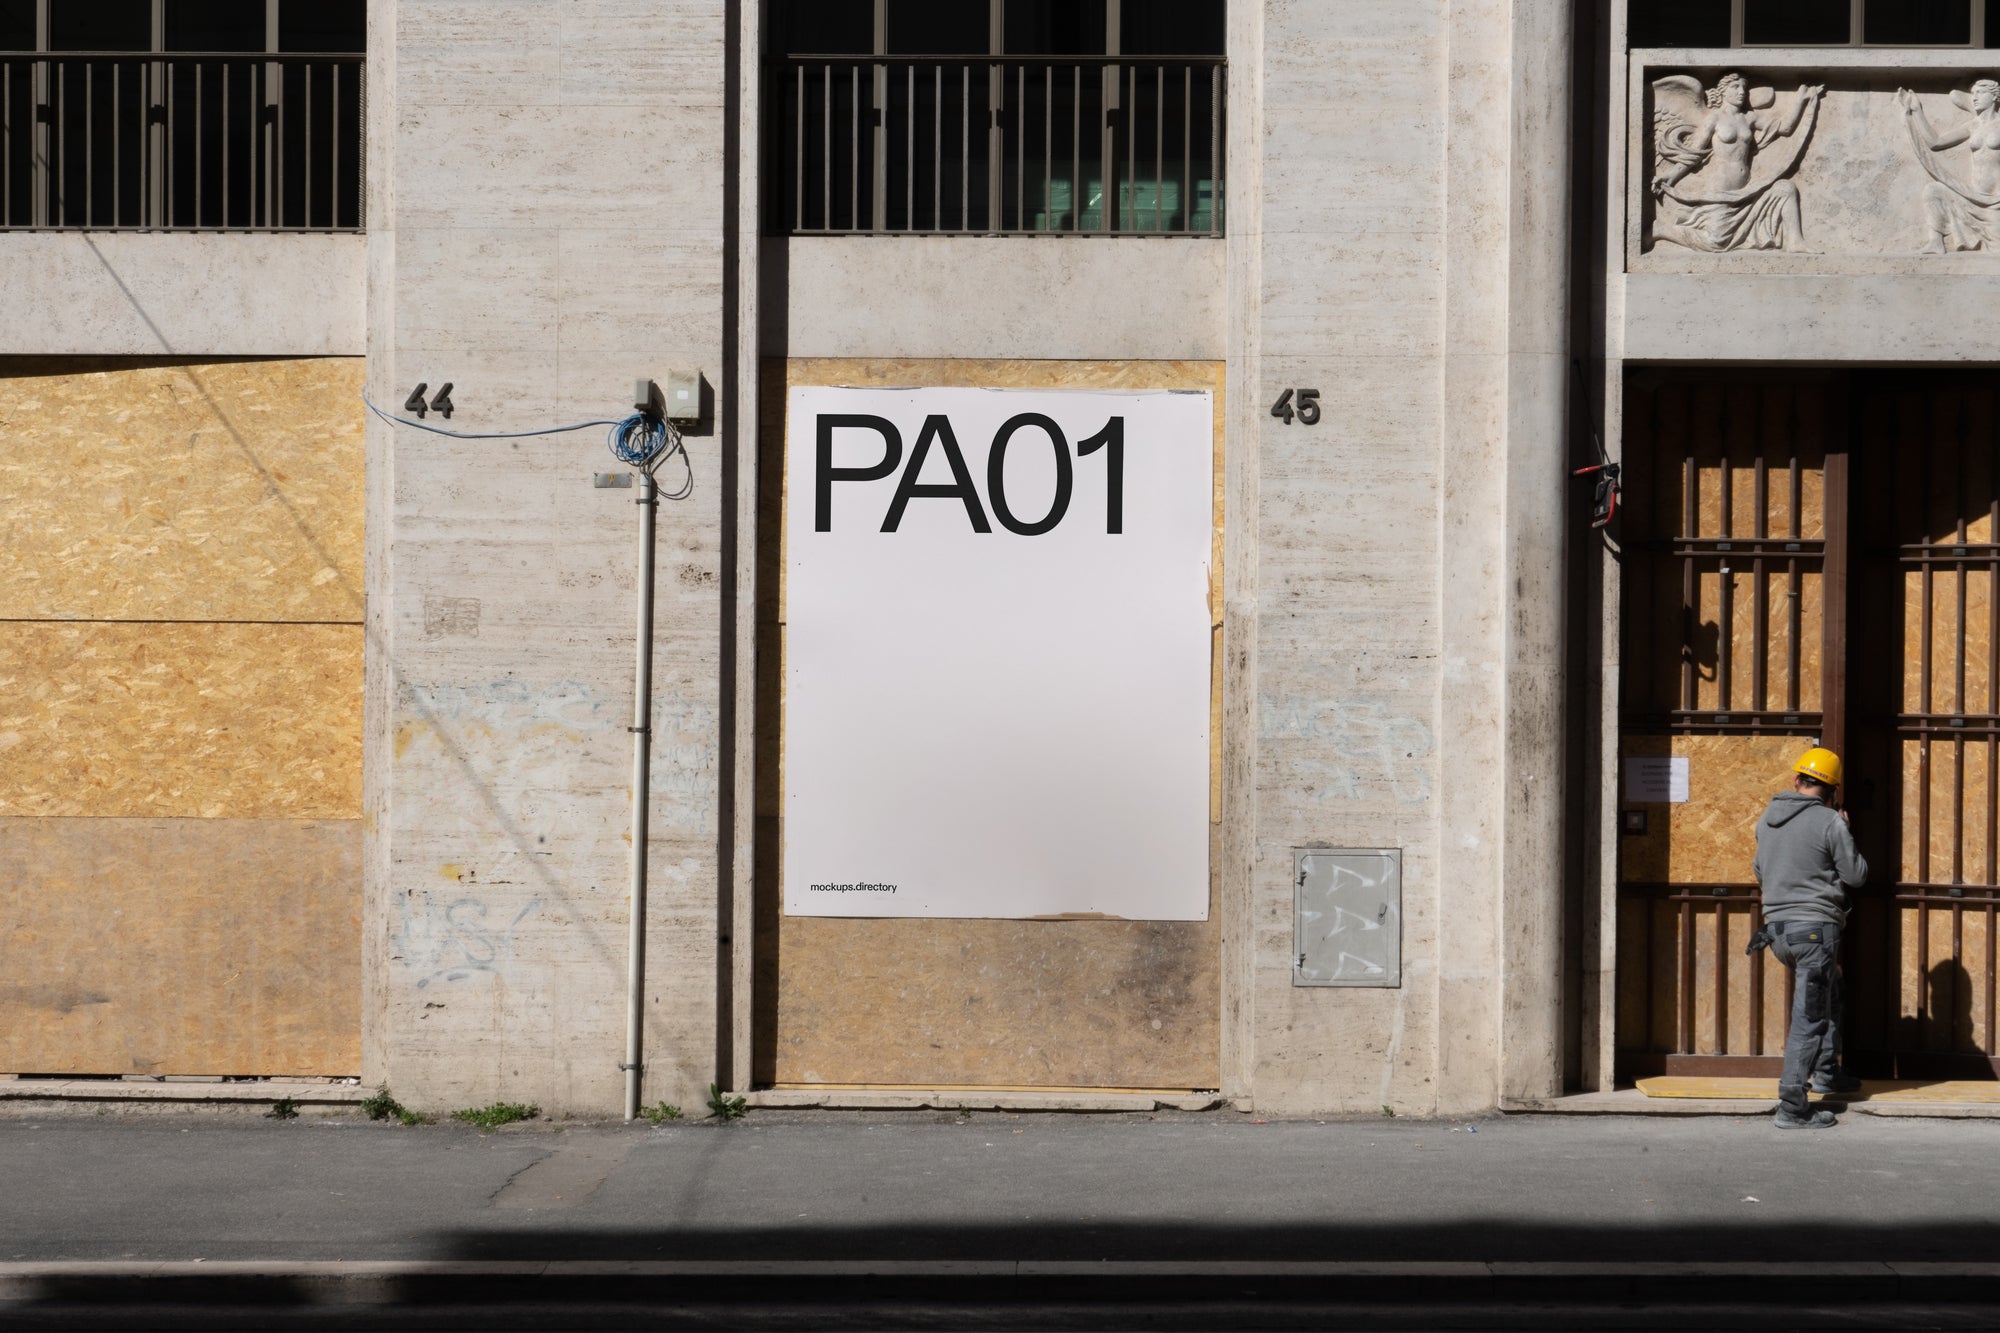 PA01 — Glued Poster